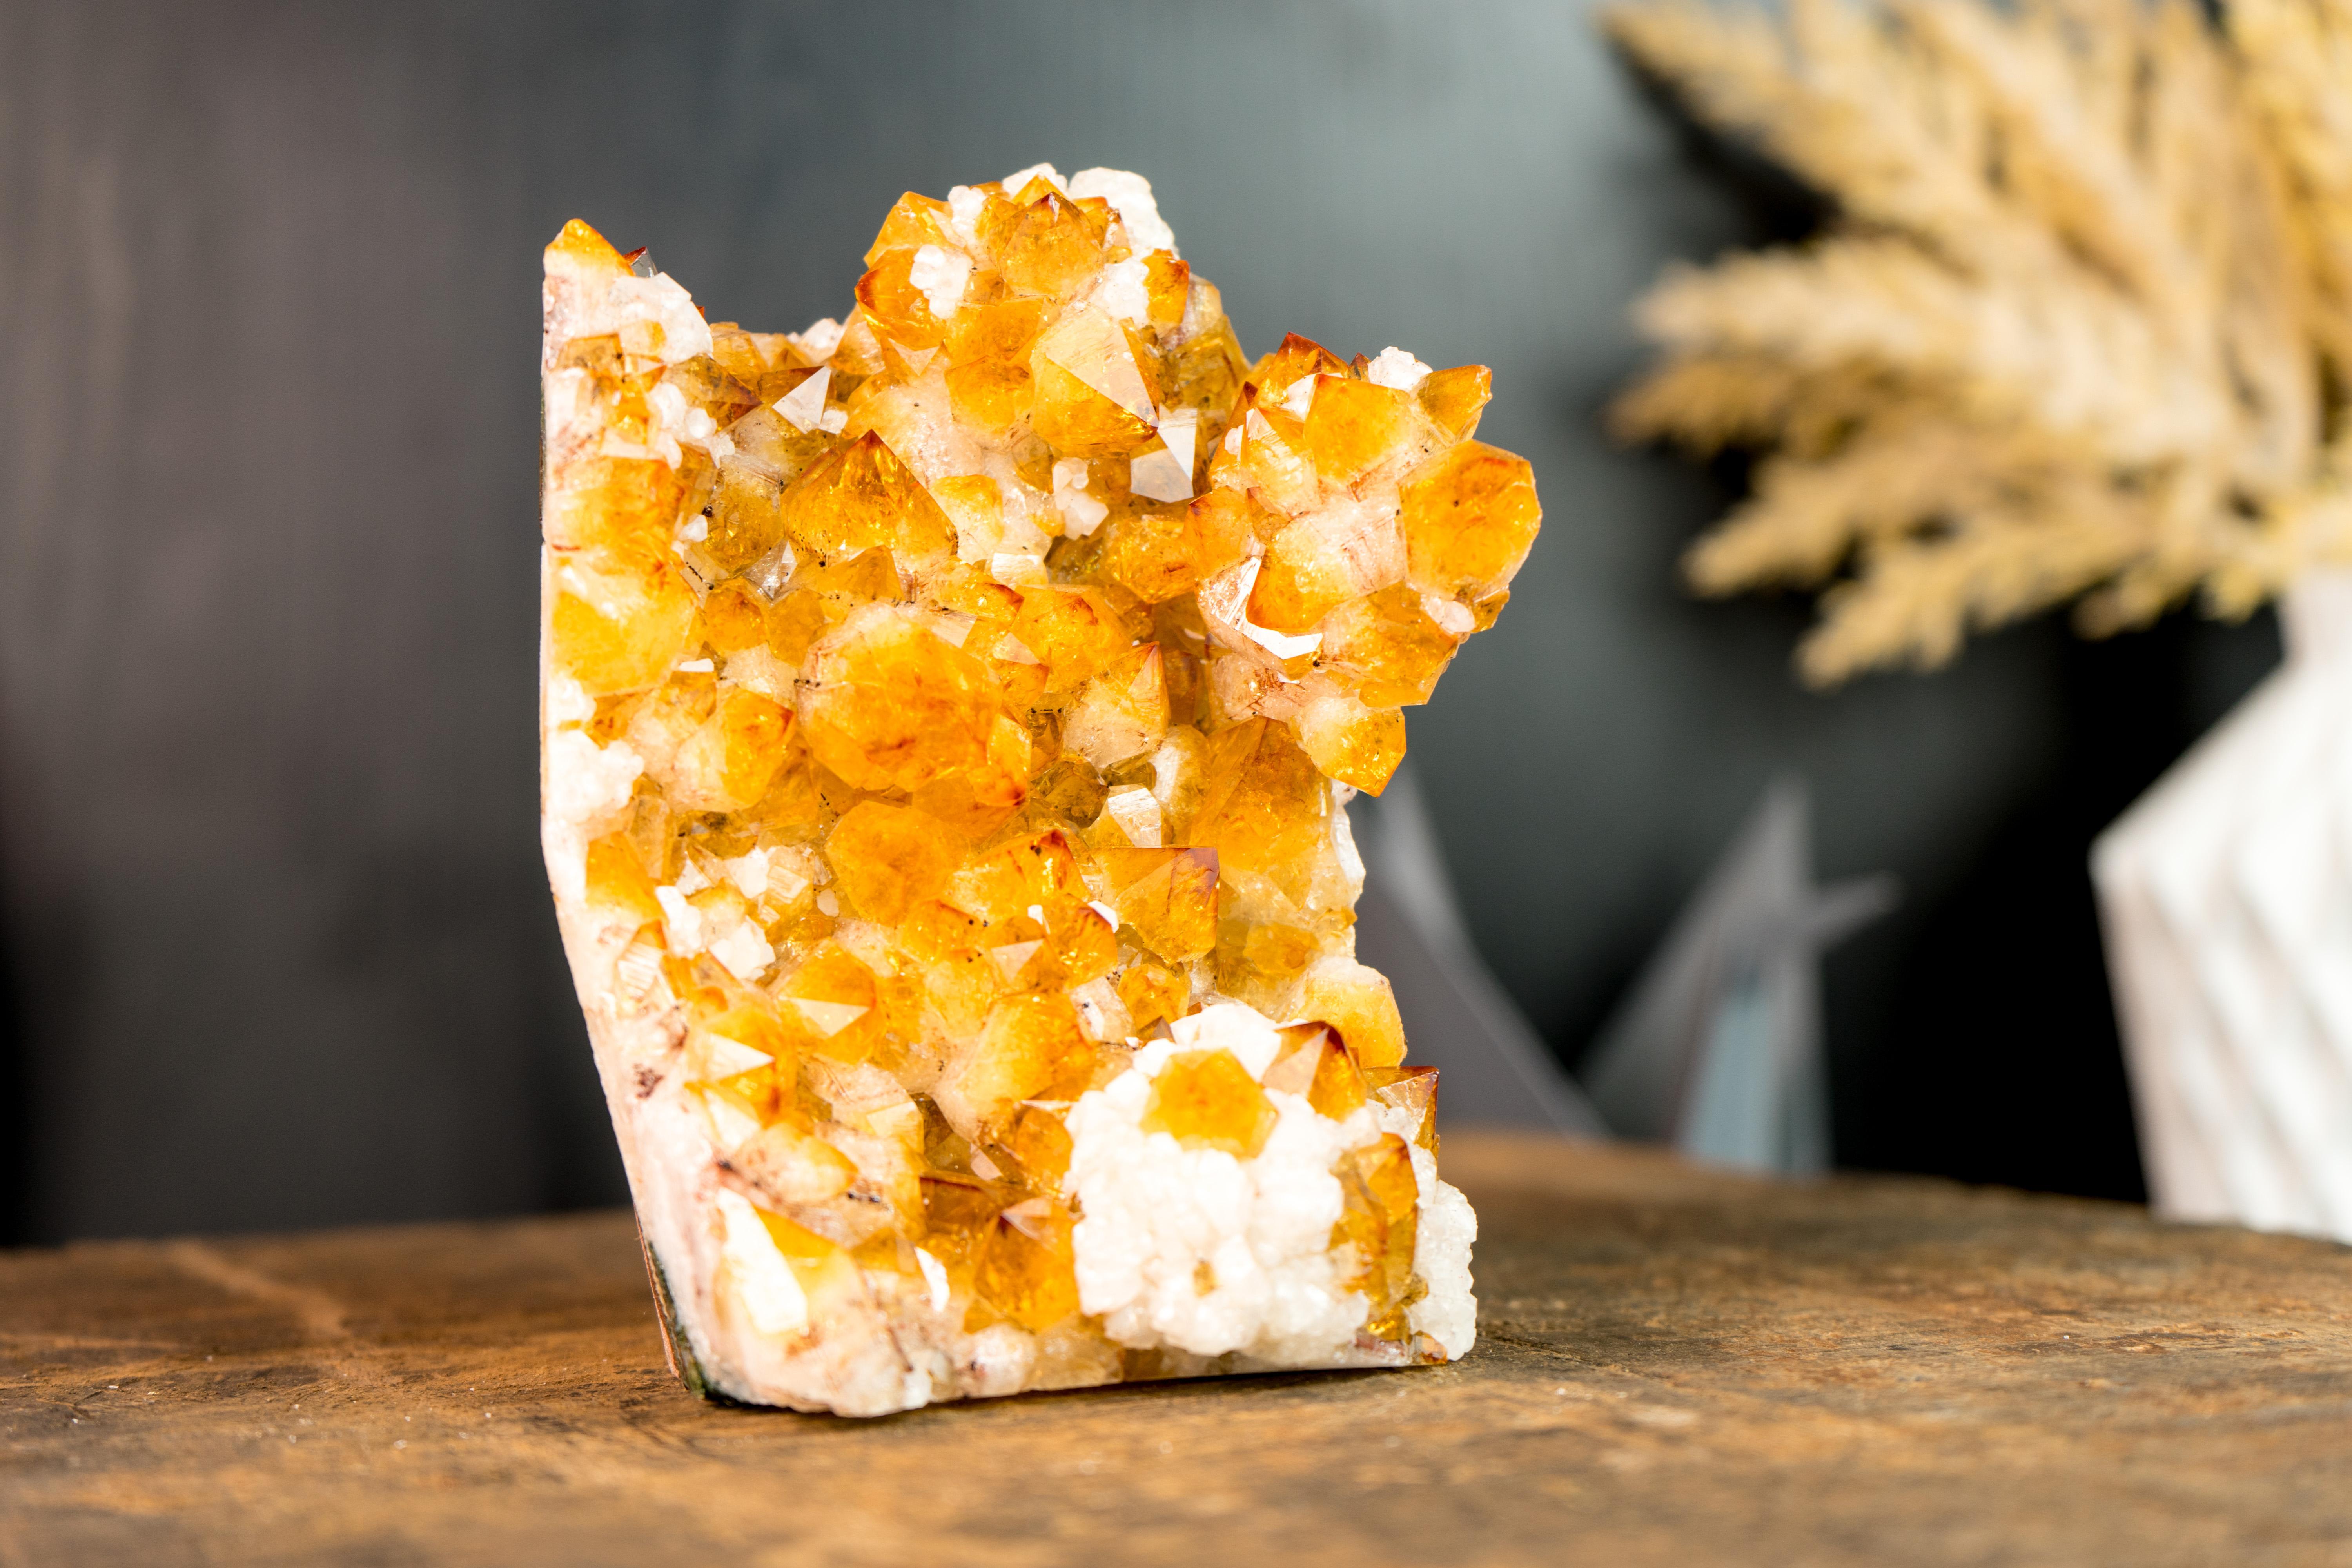 Bringing rare Stalactite Flower formations covered by dazzling Citrine Druzy and Calcite, this Citrine Cluster exemplifies a Natural Artwork that is ready to become the centerpiece of your collection, or the energetic source of your home